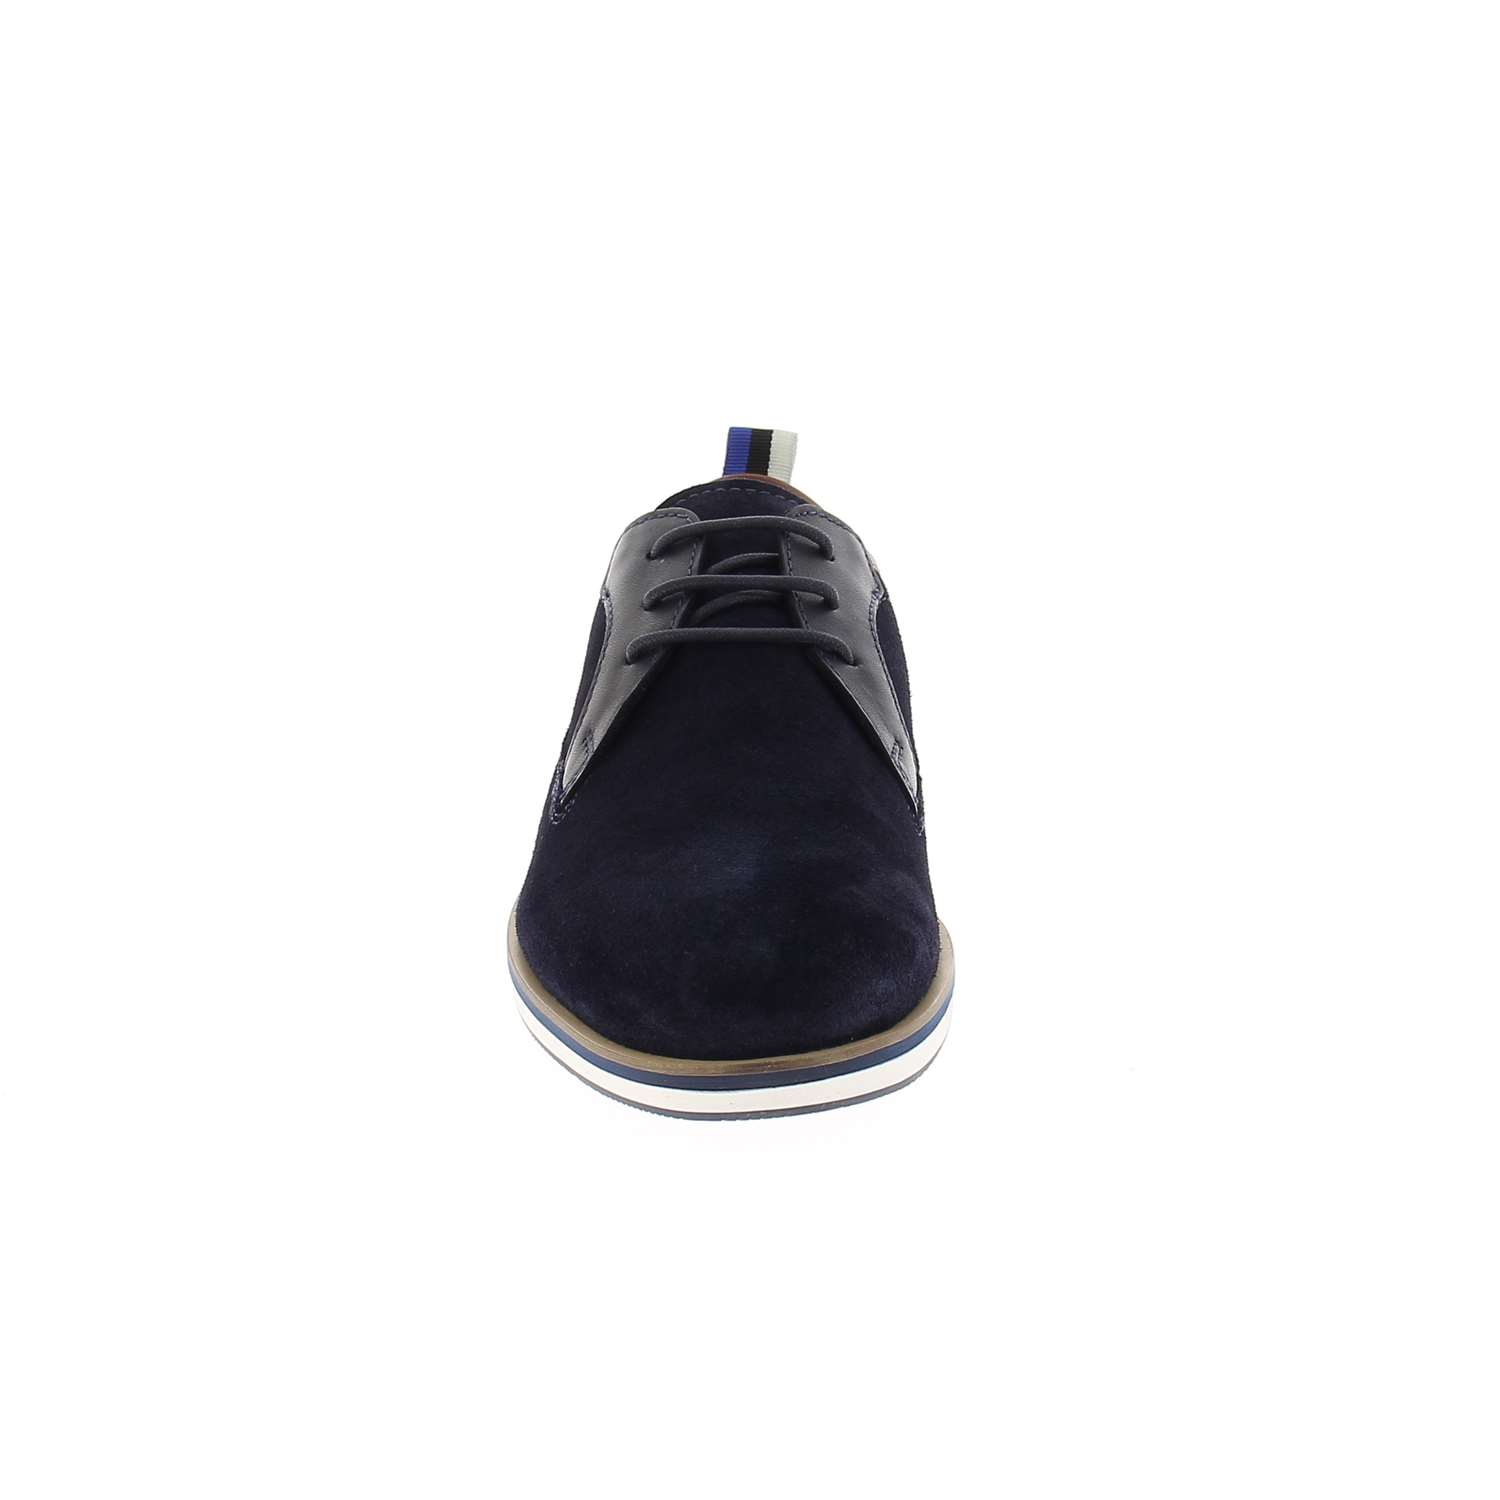 03 - PYRAMID - CLEON - Chaussures à lacets - Nubuck